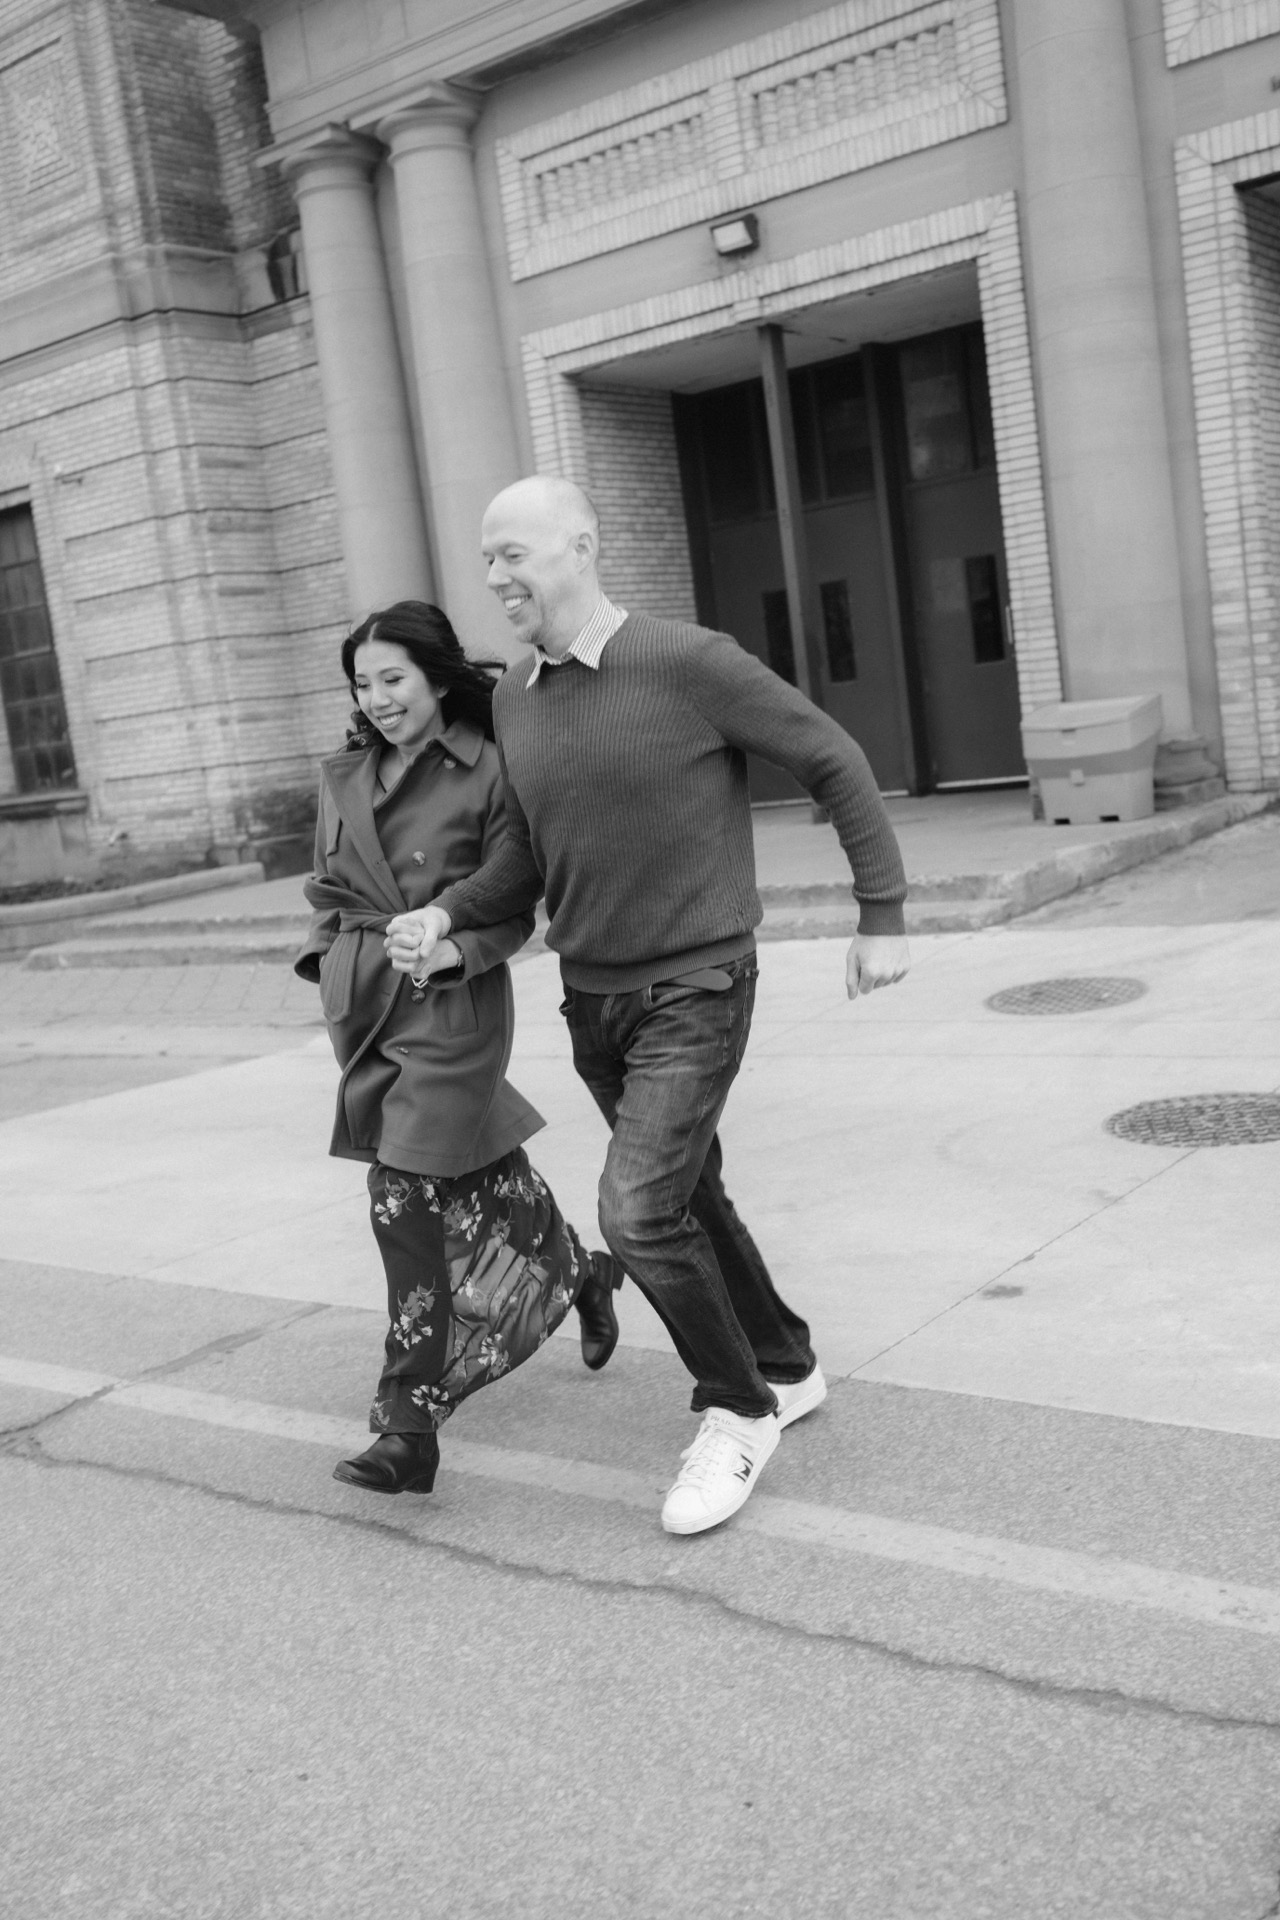 Two people walking briskly across a street in an urban setting, captured in black and white.